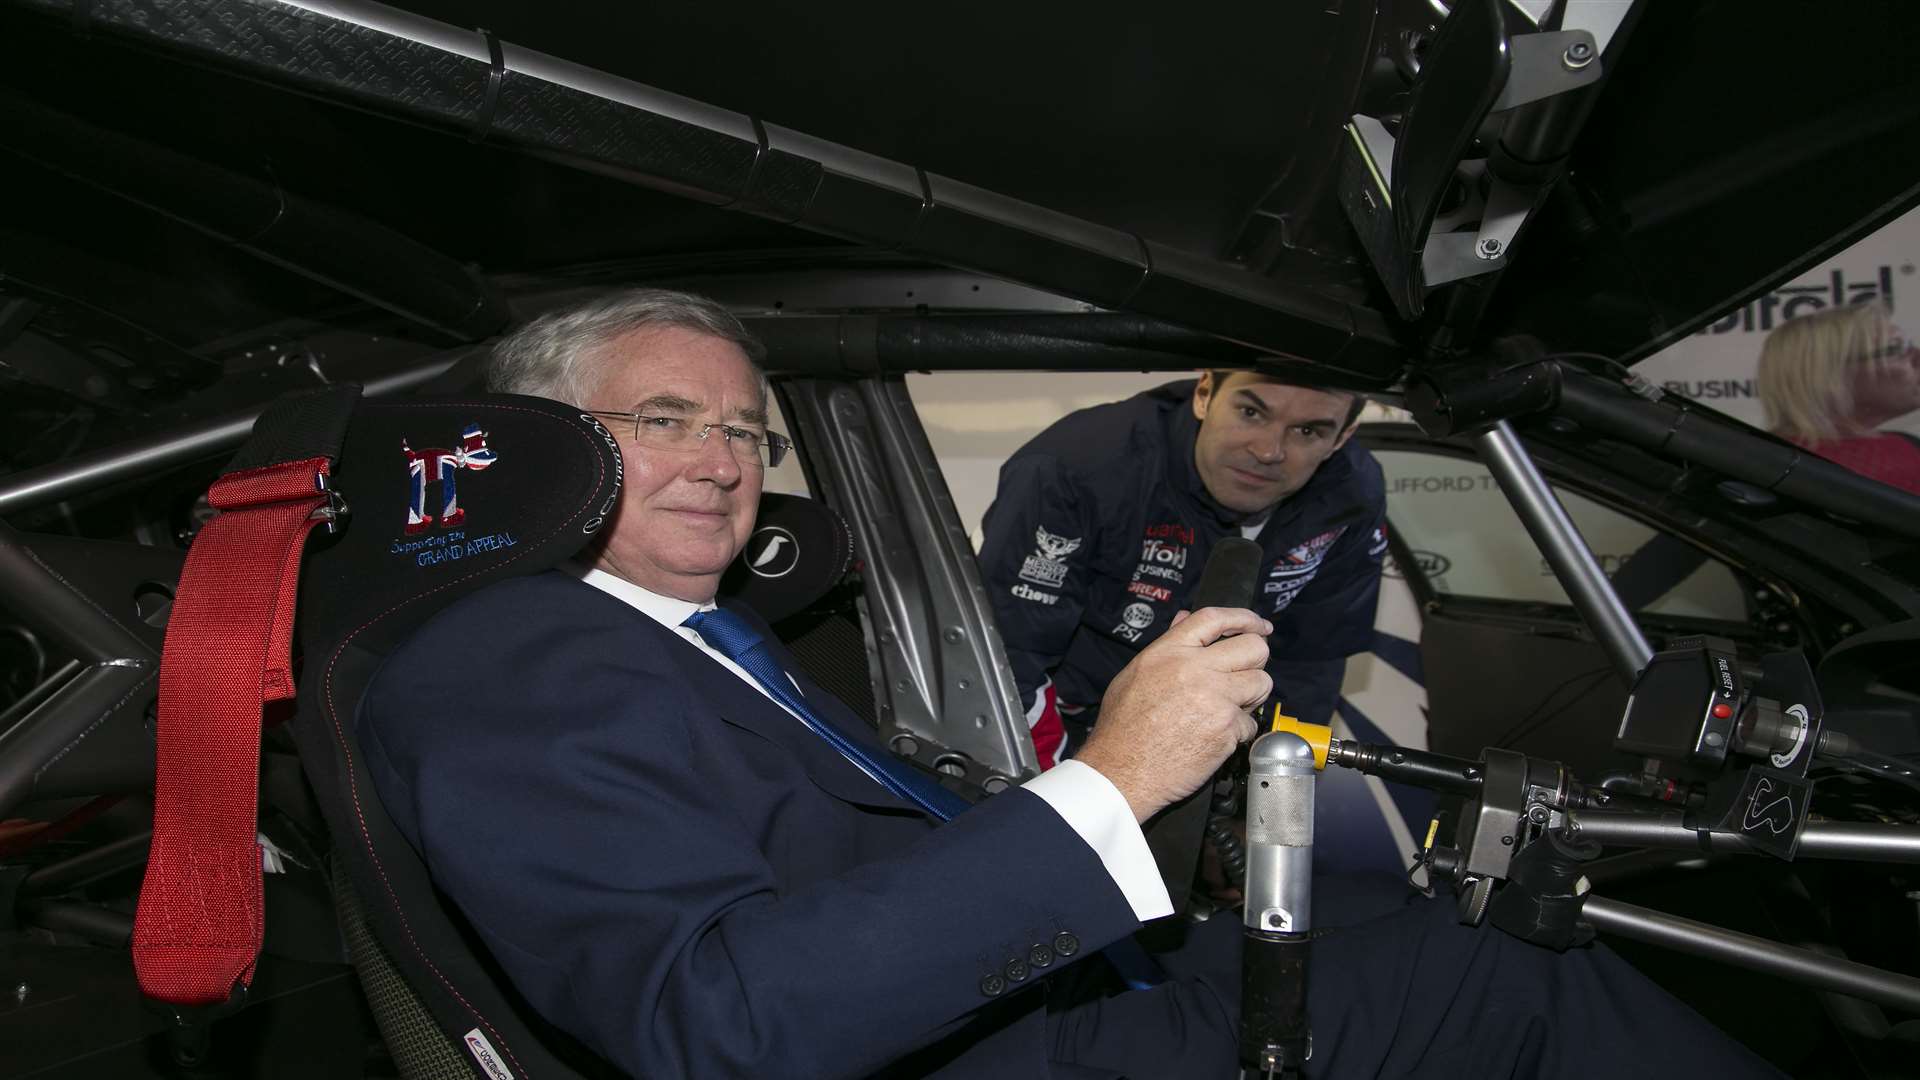 Mr Fallon sits in a racing car at Brands Hatch circuit